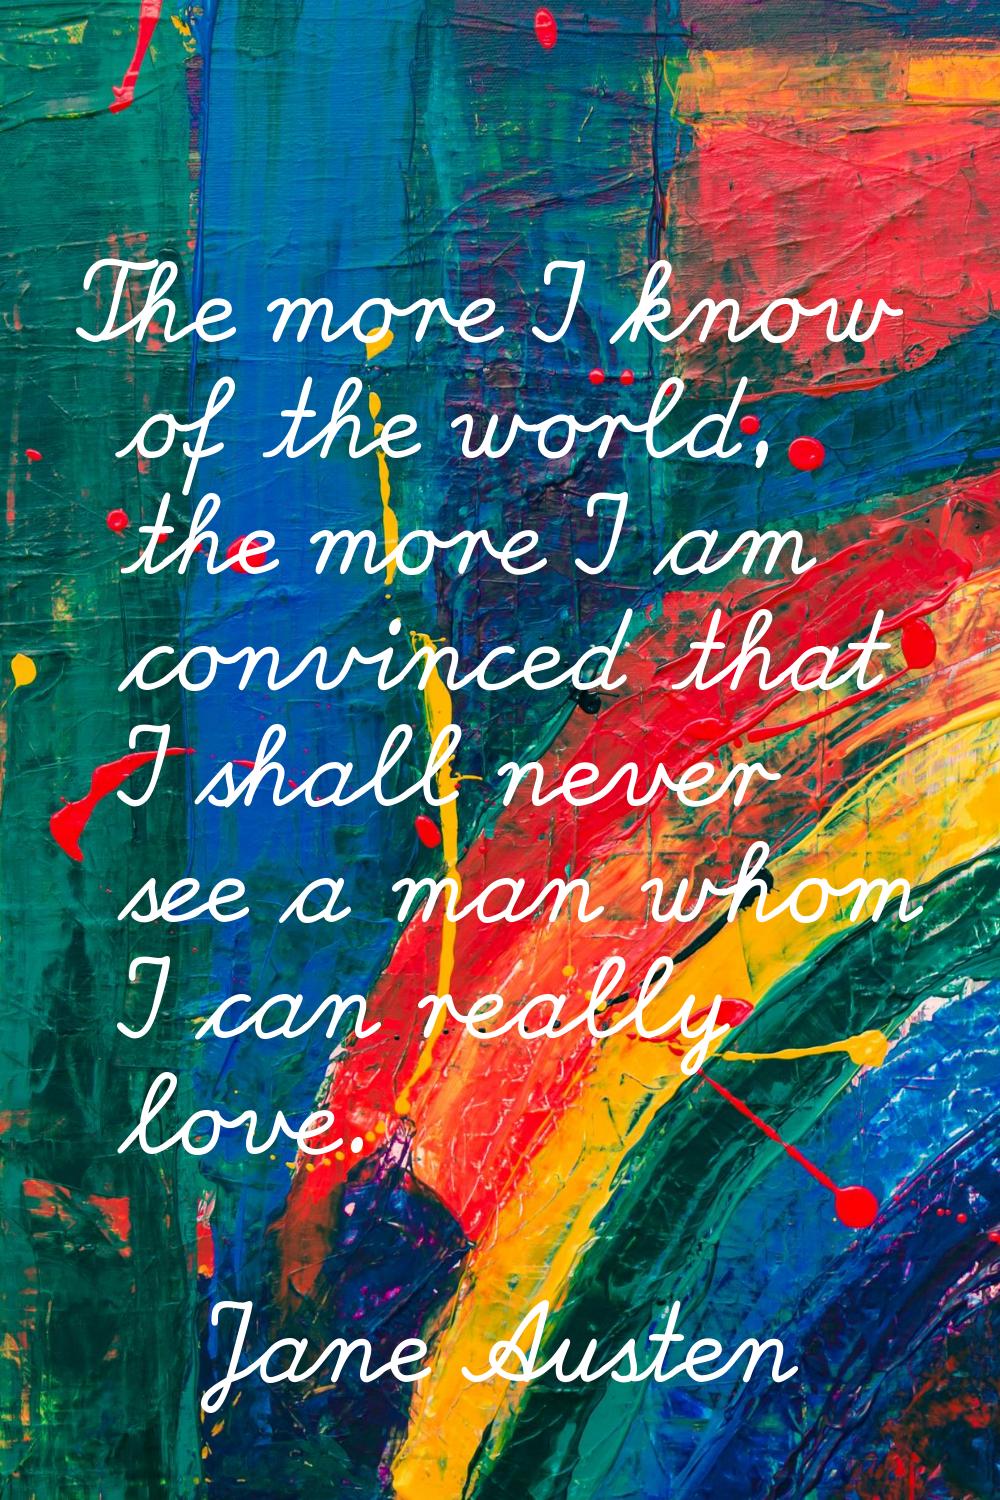 The more I know of the world, the more I am convinced that I shall never see a man whom I can reall